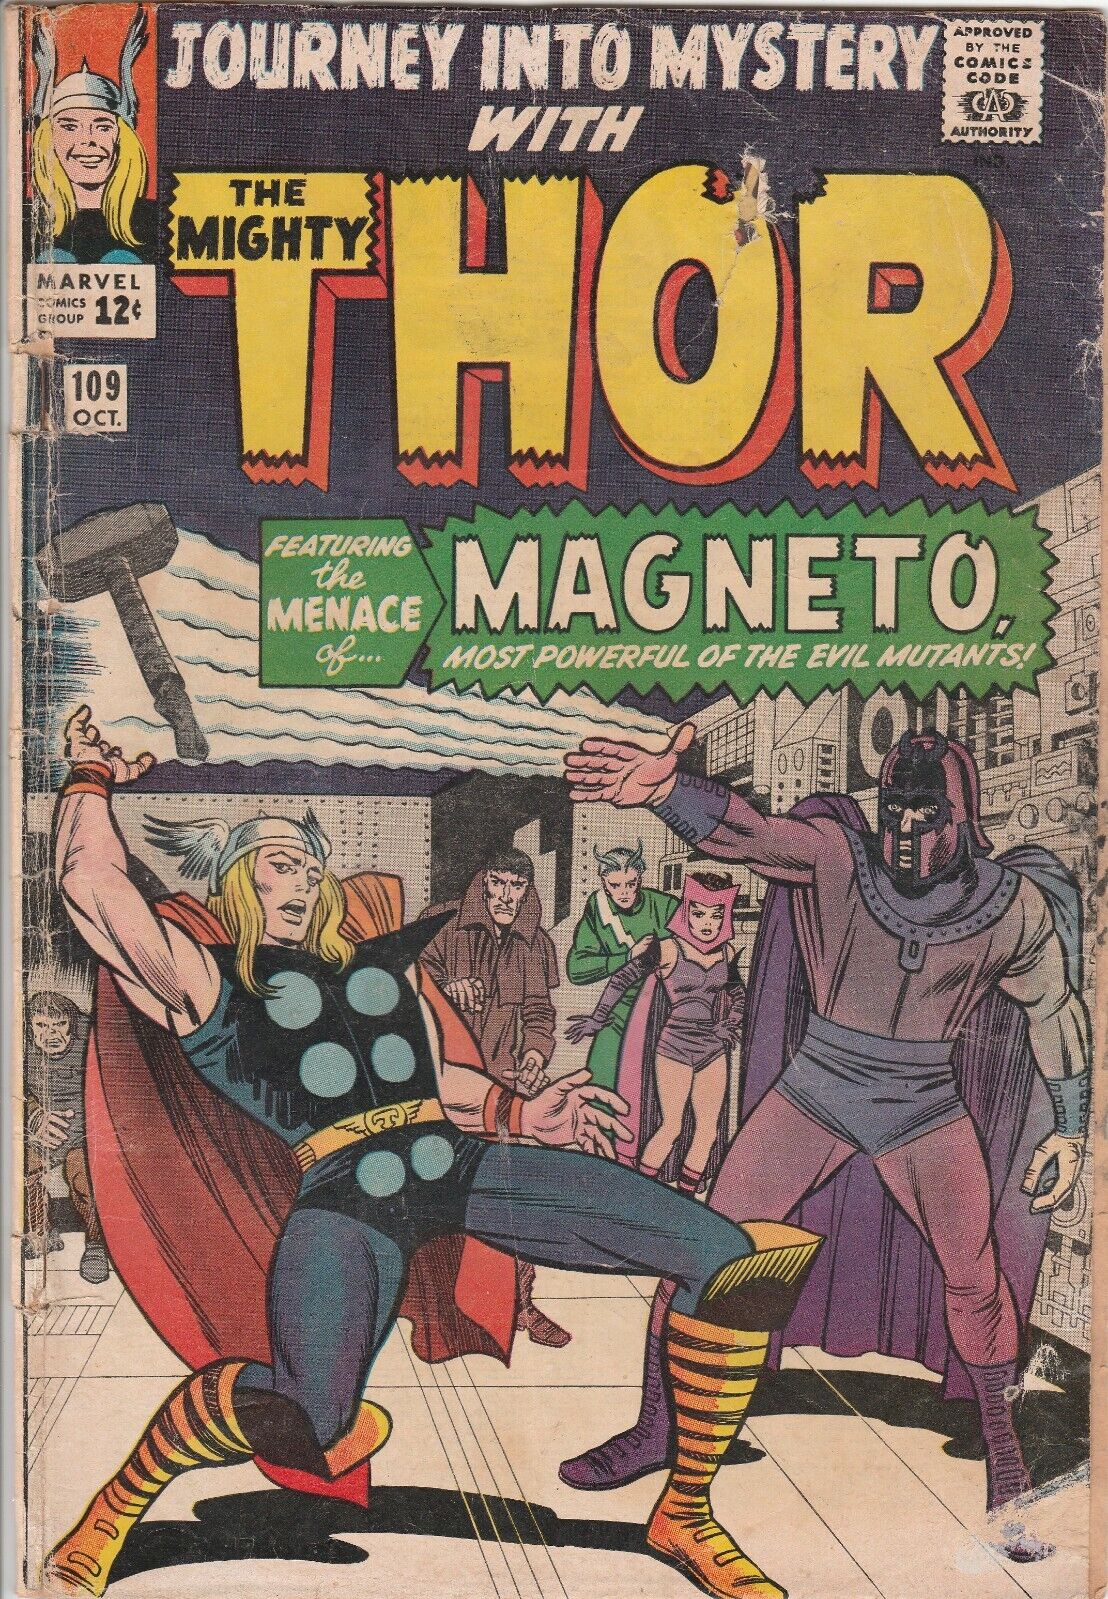 Marvel Comics 1964, Journey Into Mystery, The Mighty Thor #109 FR+, Magneto App